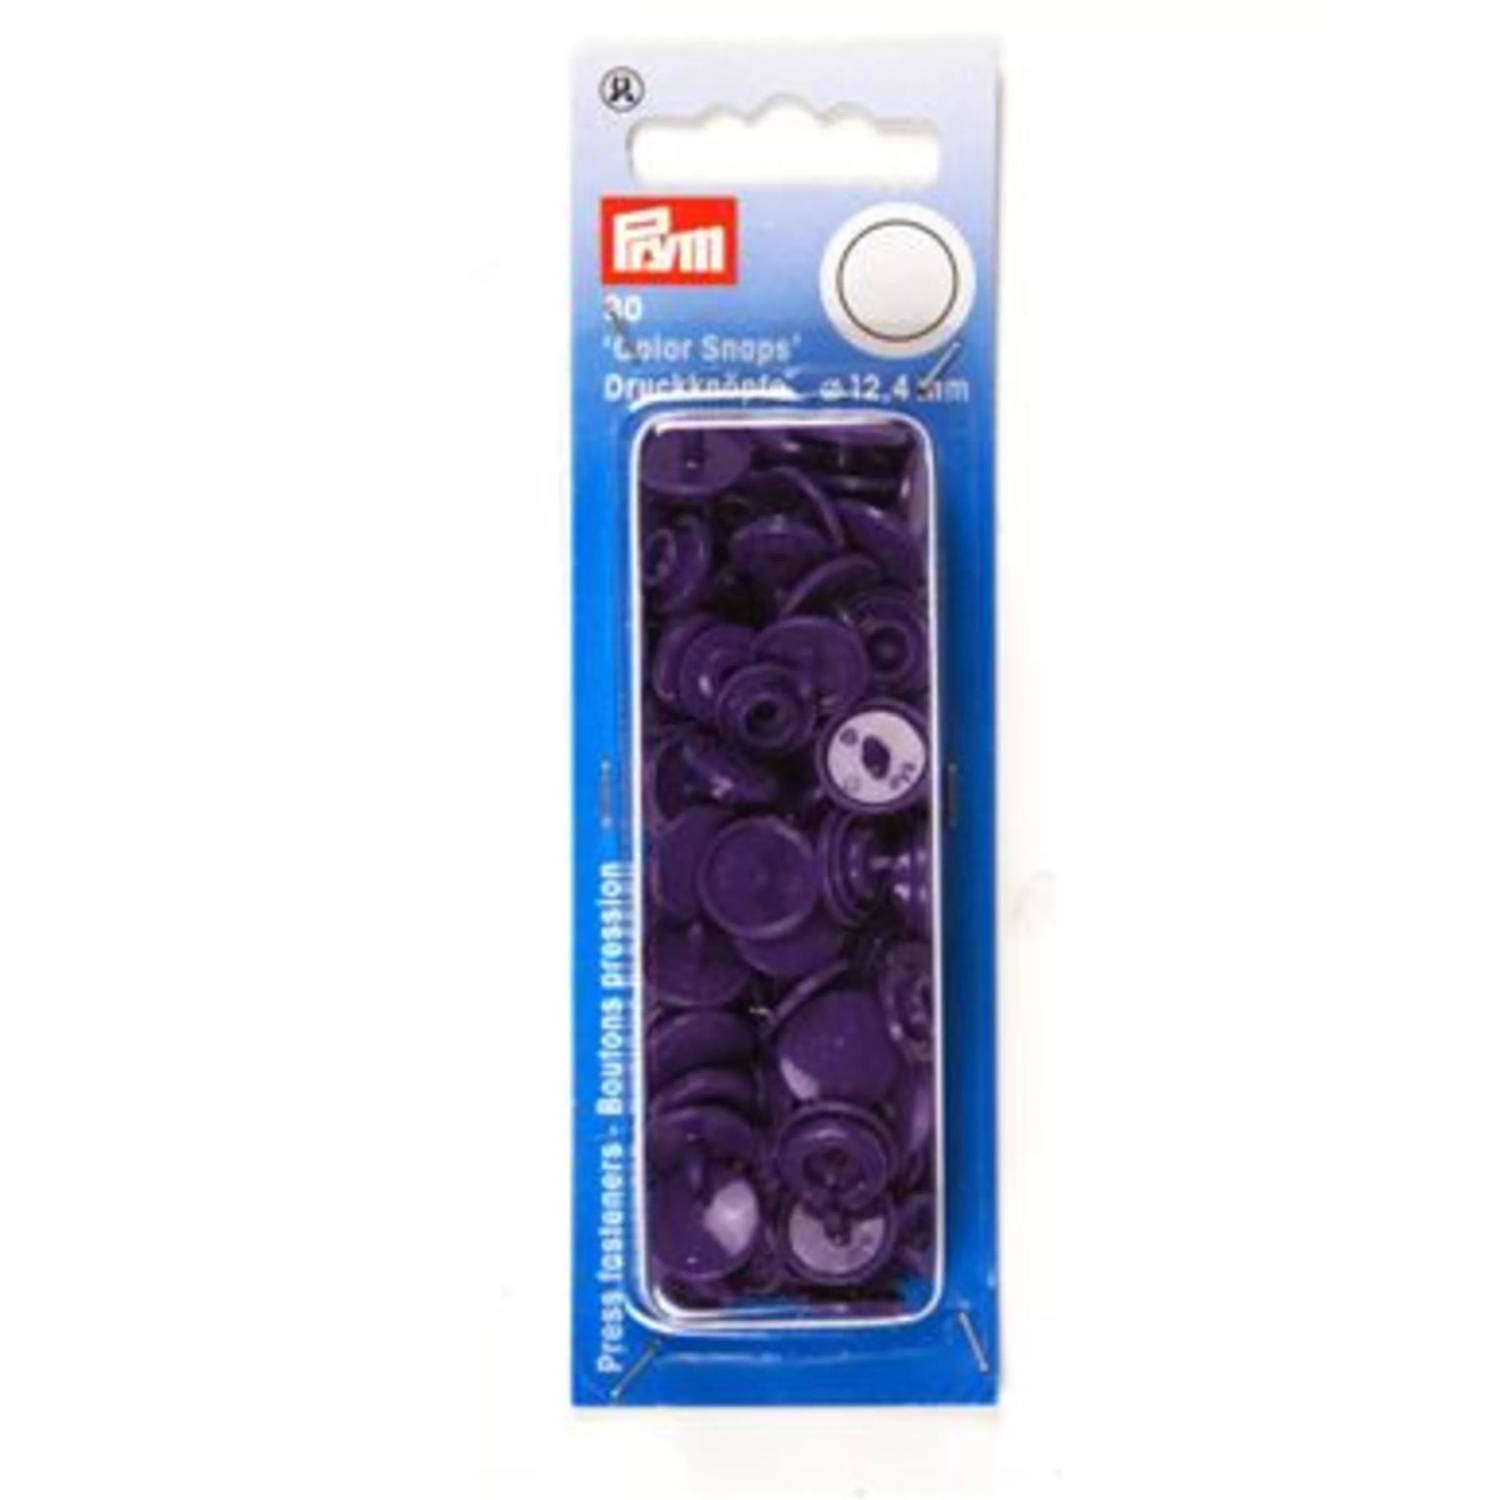 Prym color snap - donker paars - 393 134 - 12,4mm